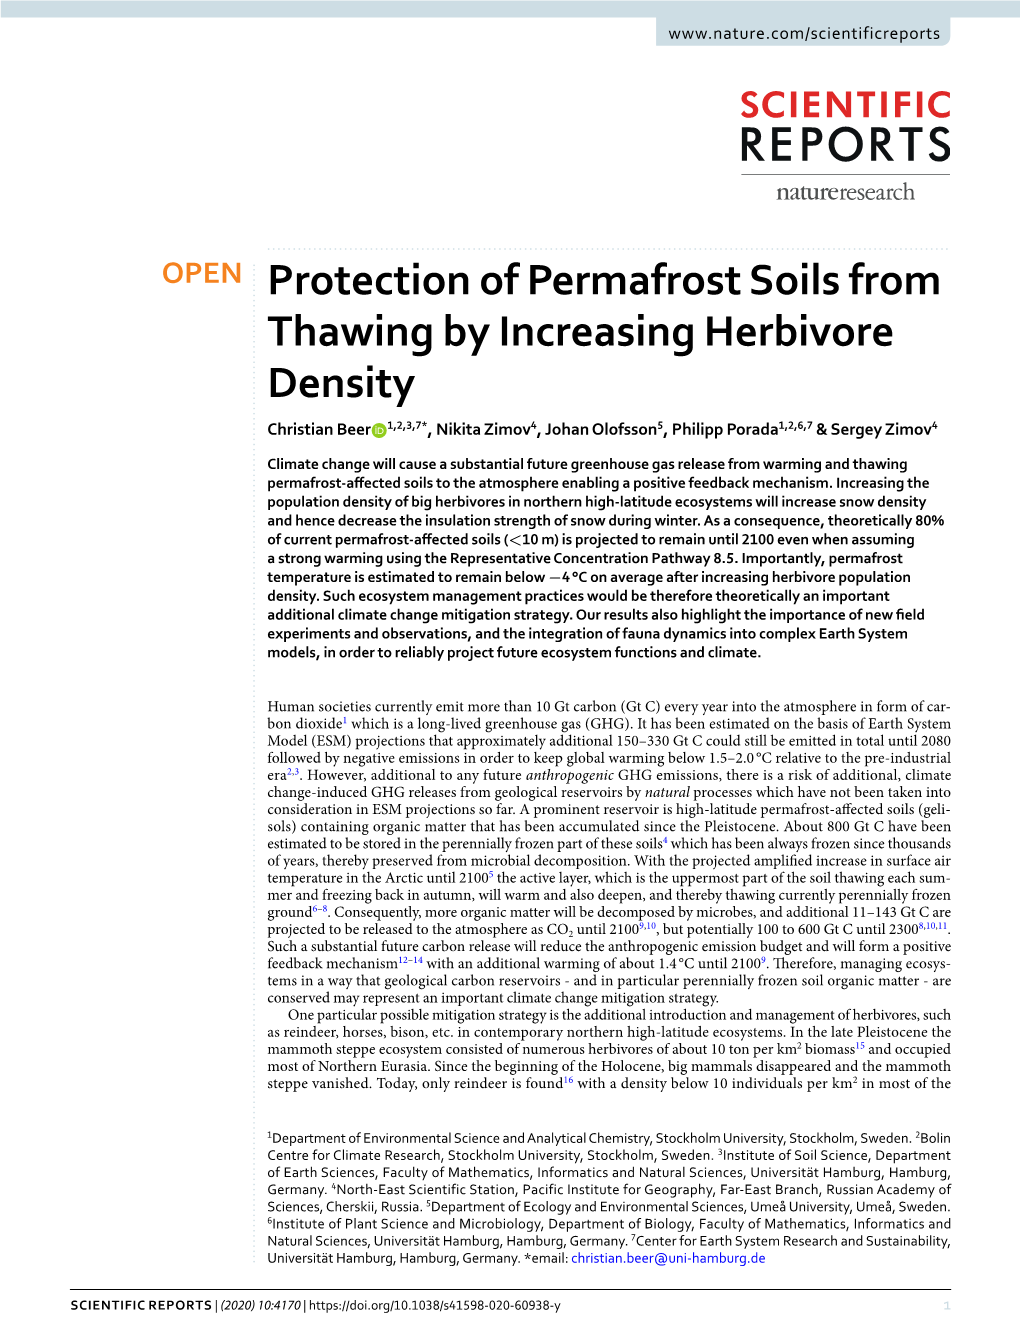 Protection of Permafrost Soils from Thawing By